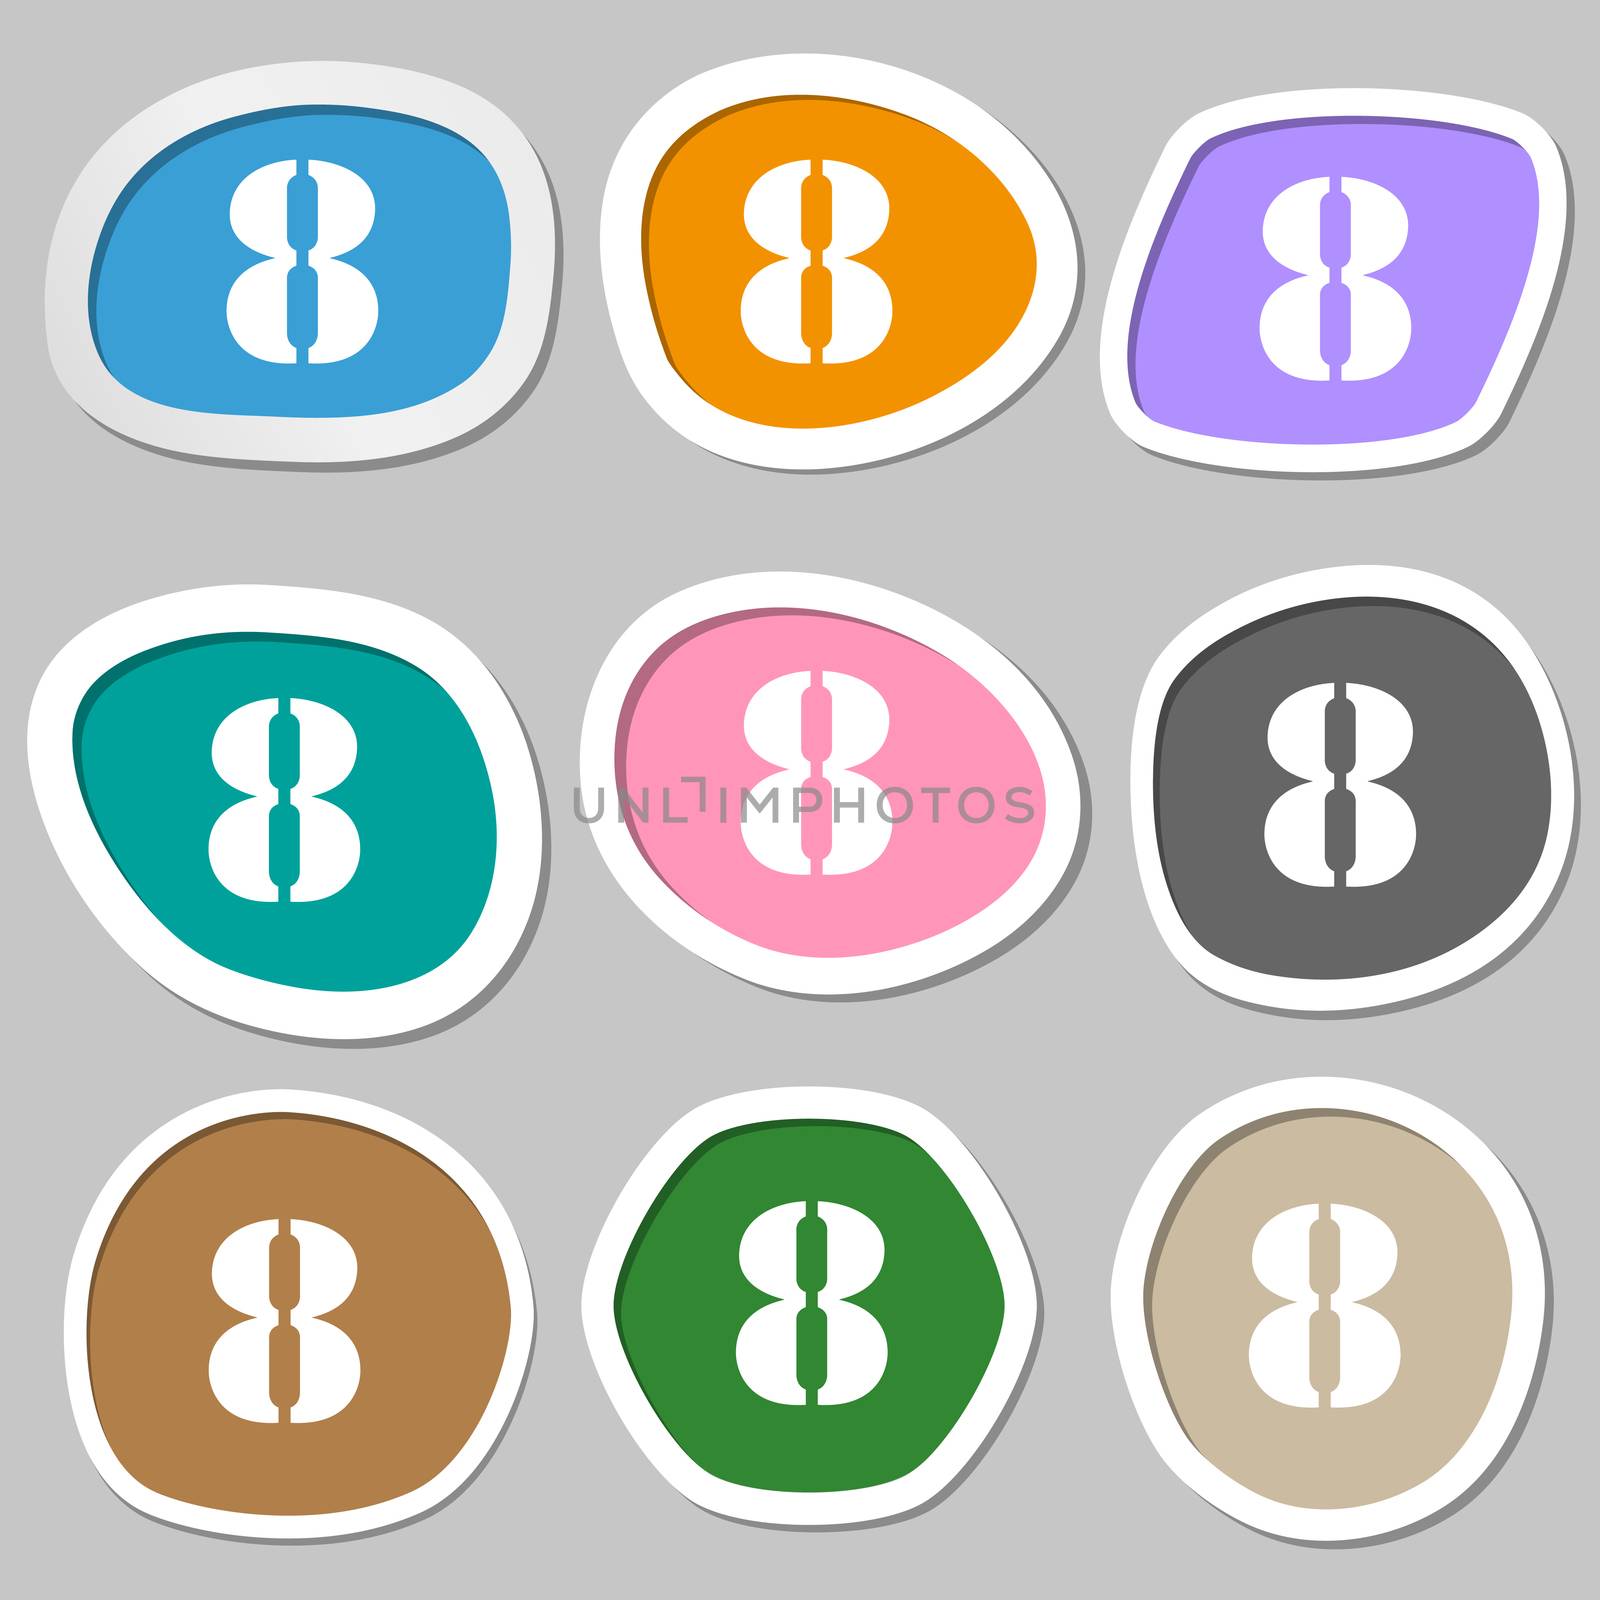 number Eight icon sign. Multicolored paper stickers. illustration